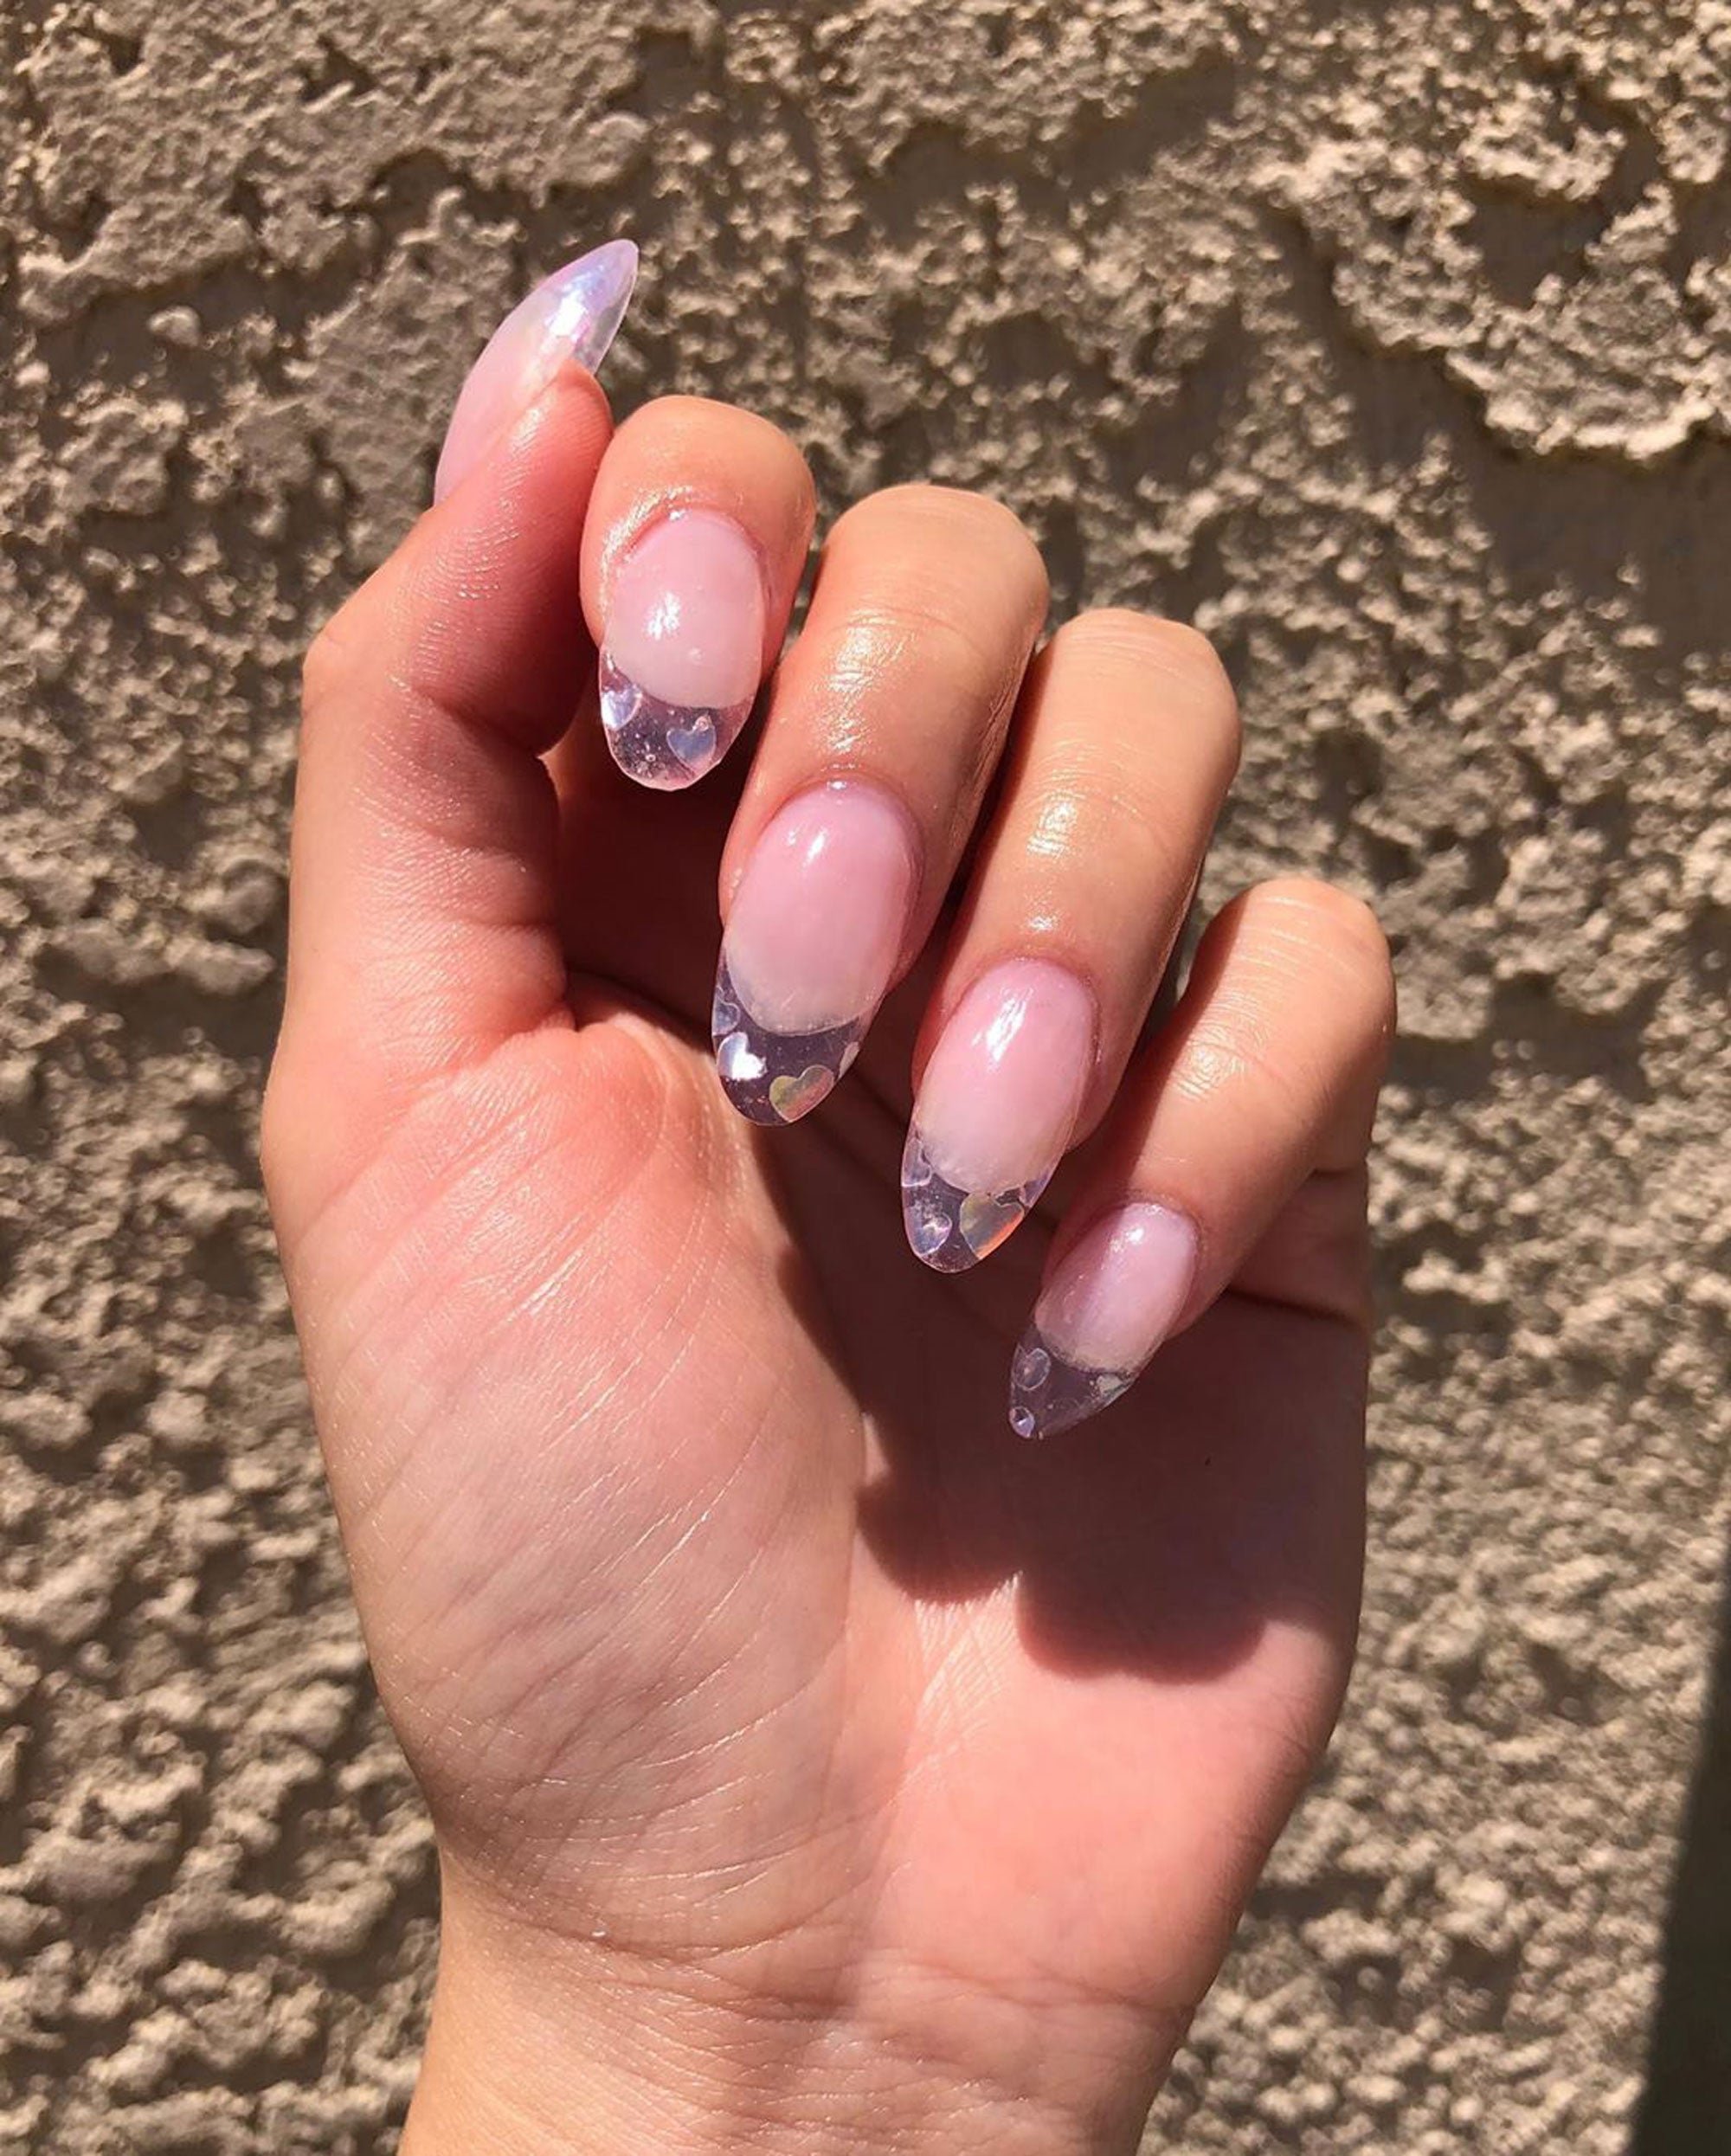 The Polygel Nails Trend Is Taking Over Instagram